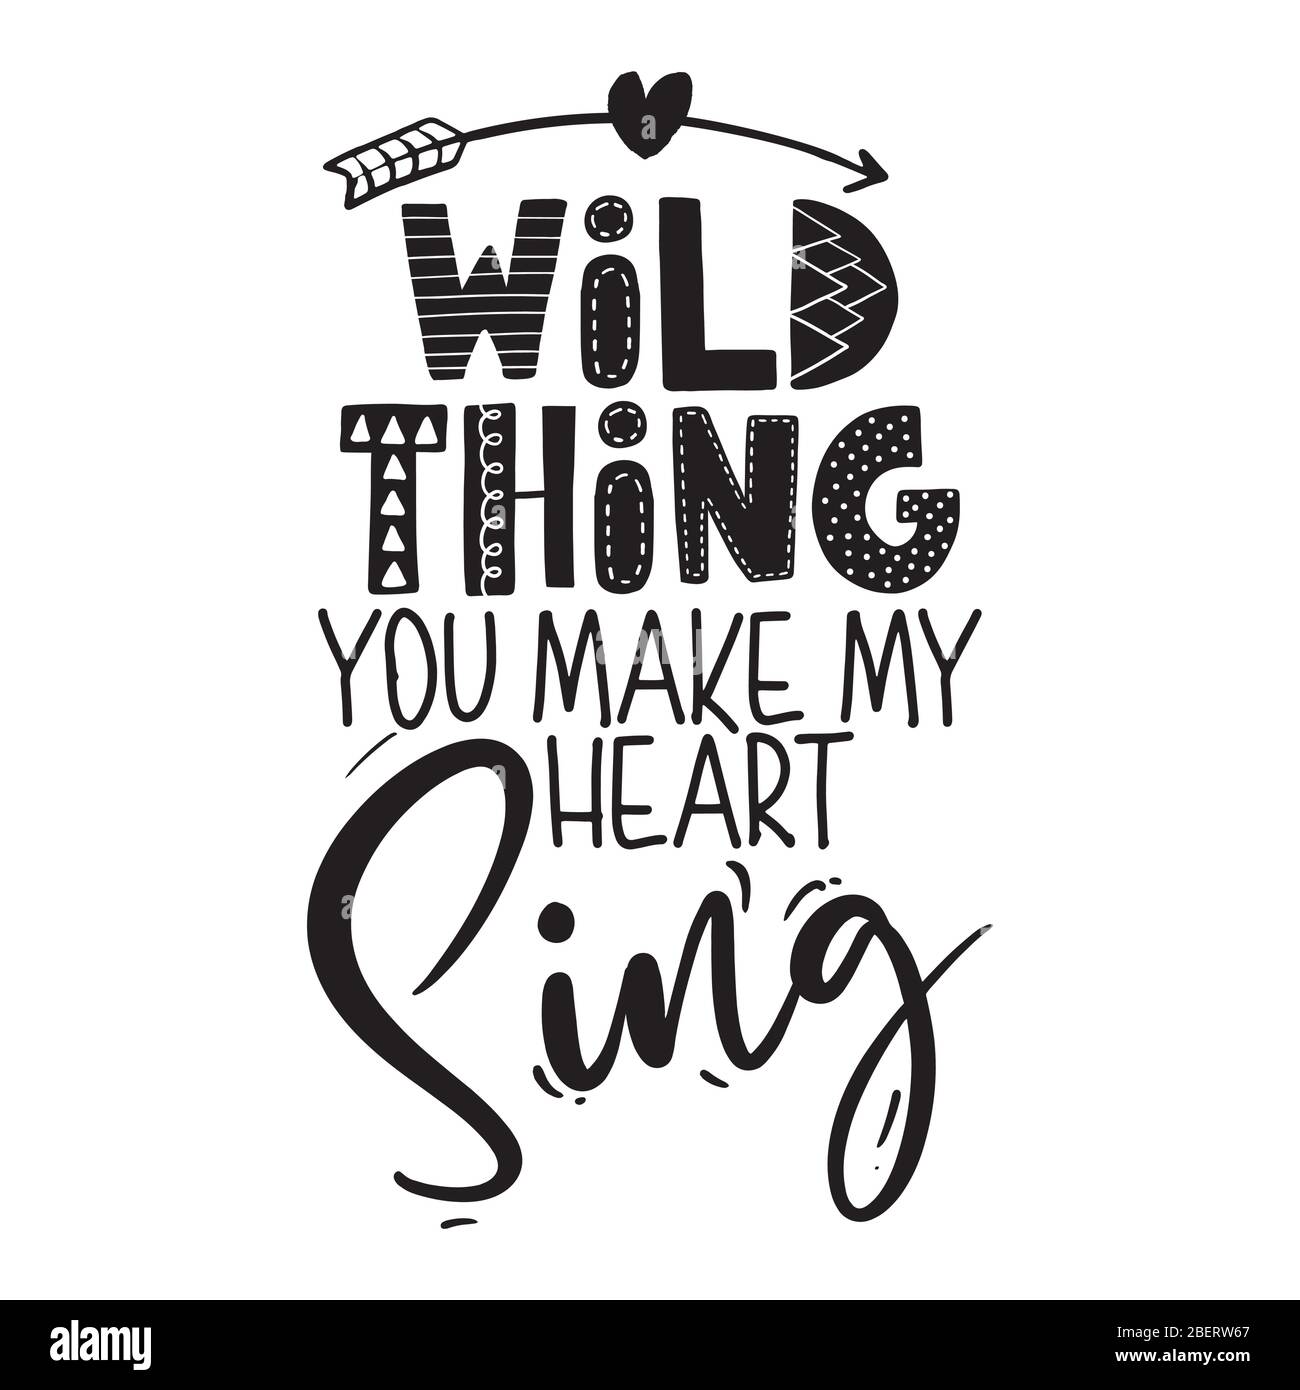 Wild thing, you make my heart sing - funny vector text quotes and arrow text drawing. Lettering poster or t-shirt textile graphic design. / Cute inspi Stock Vector